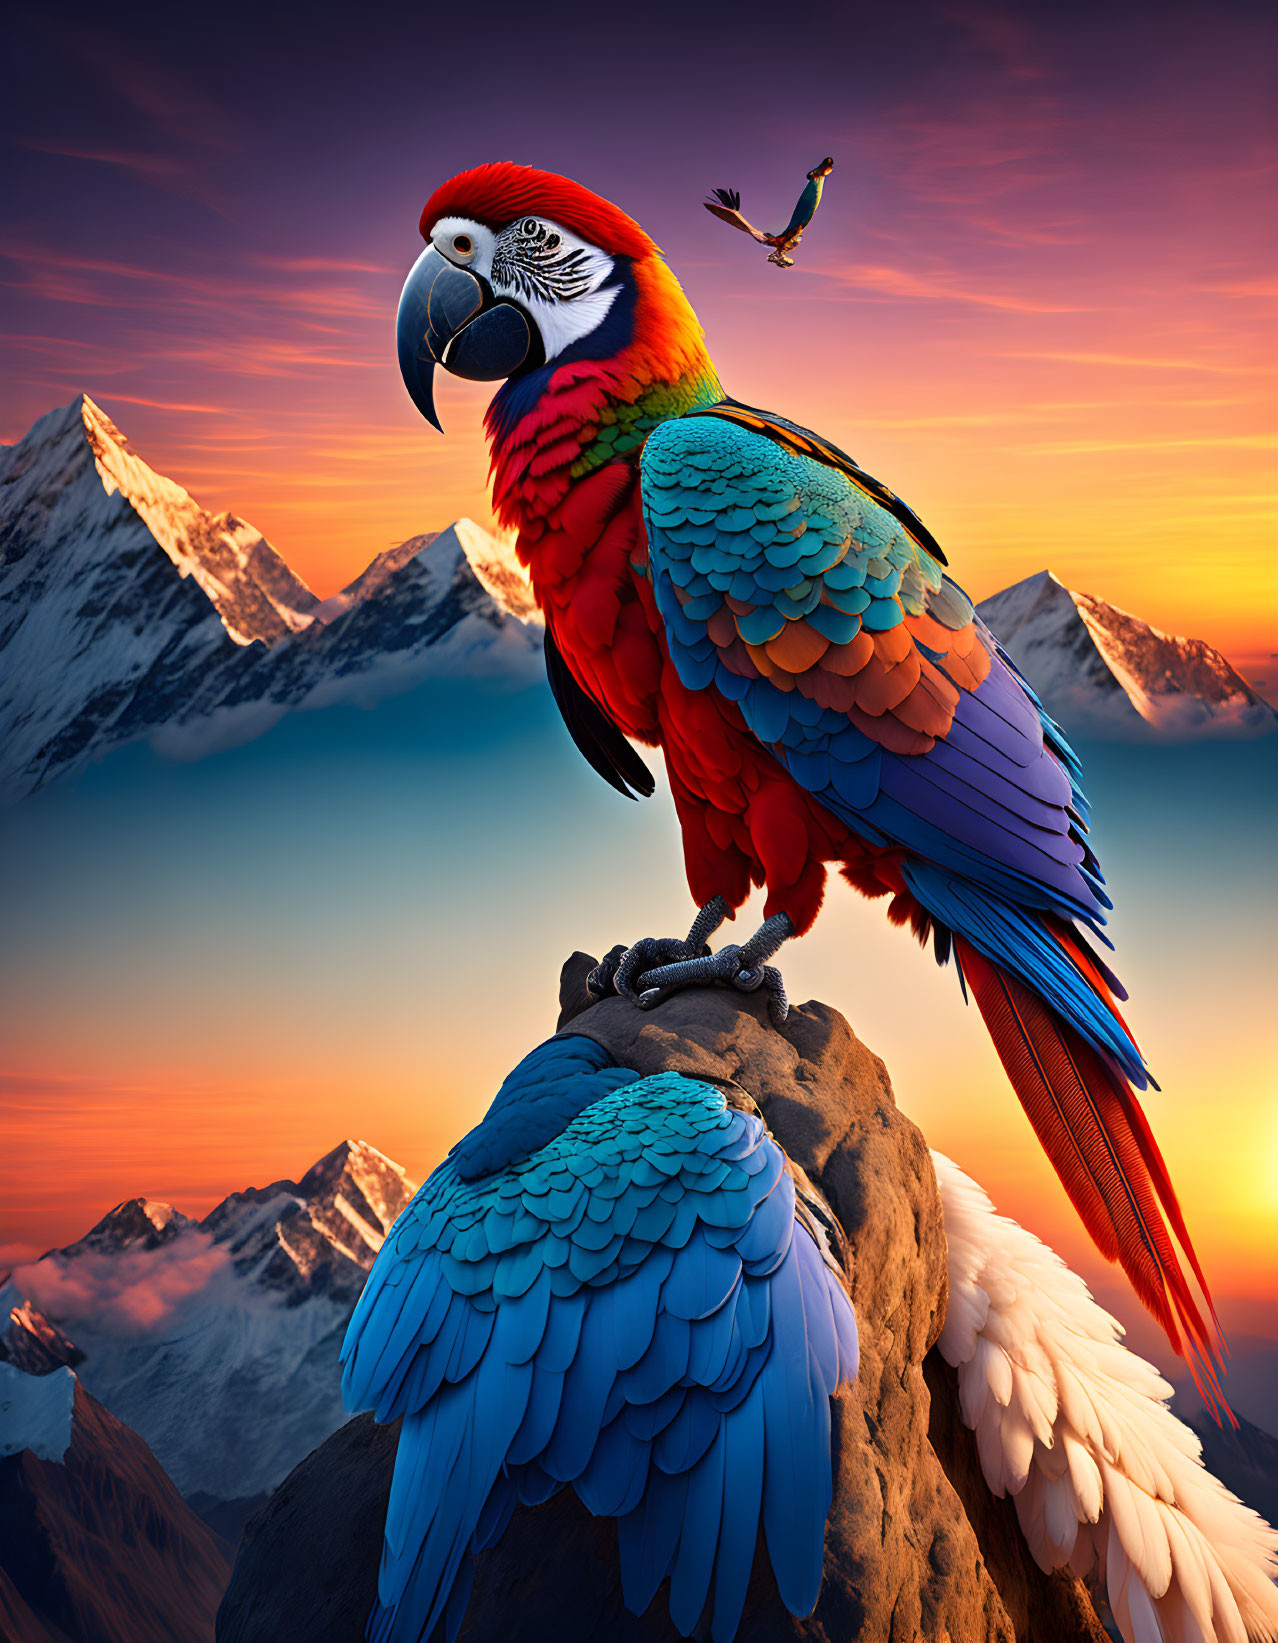 Colorful Macaw Perched with Snow-Capped Mountains at Sunset